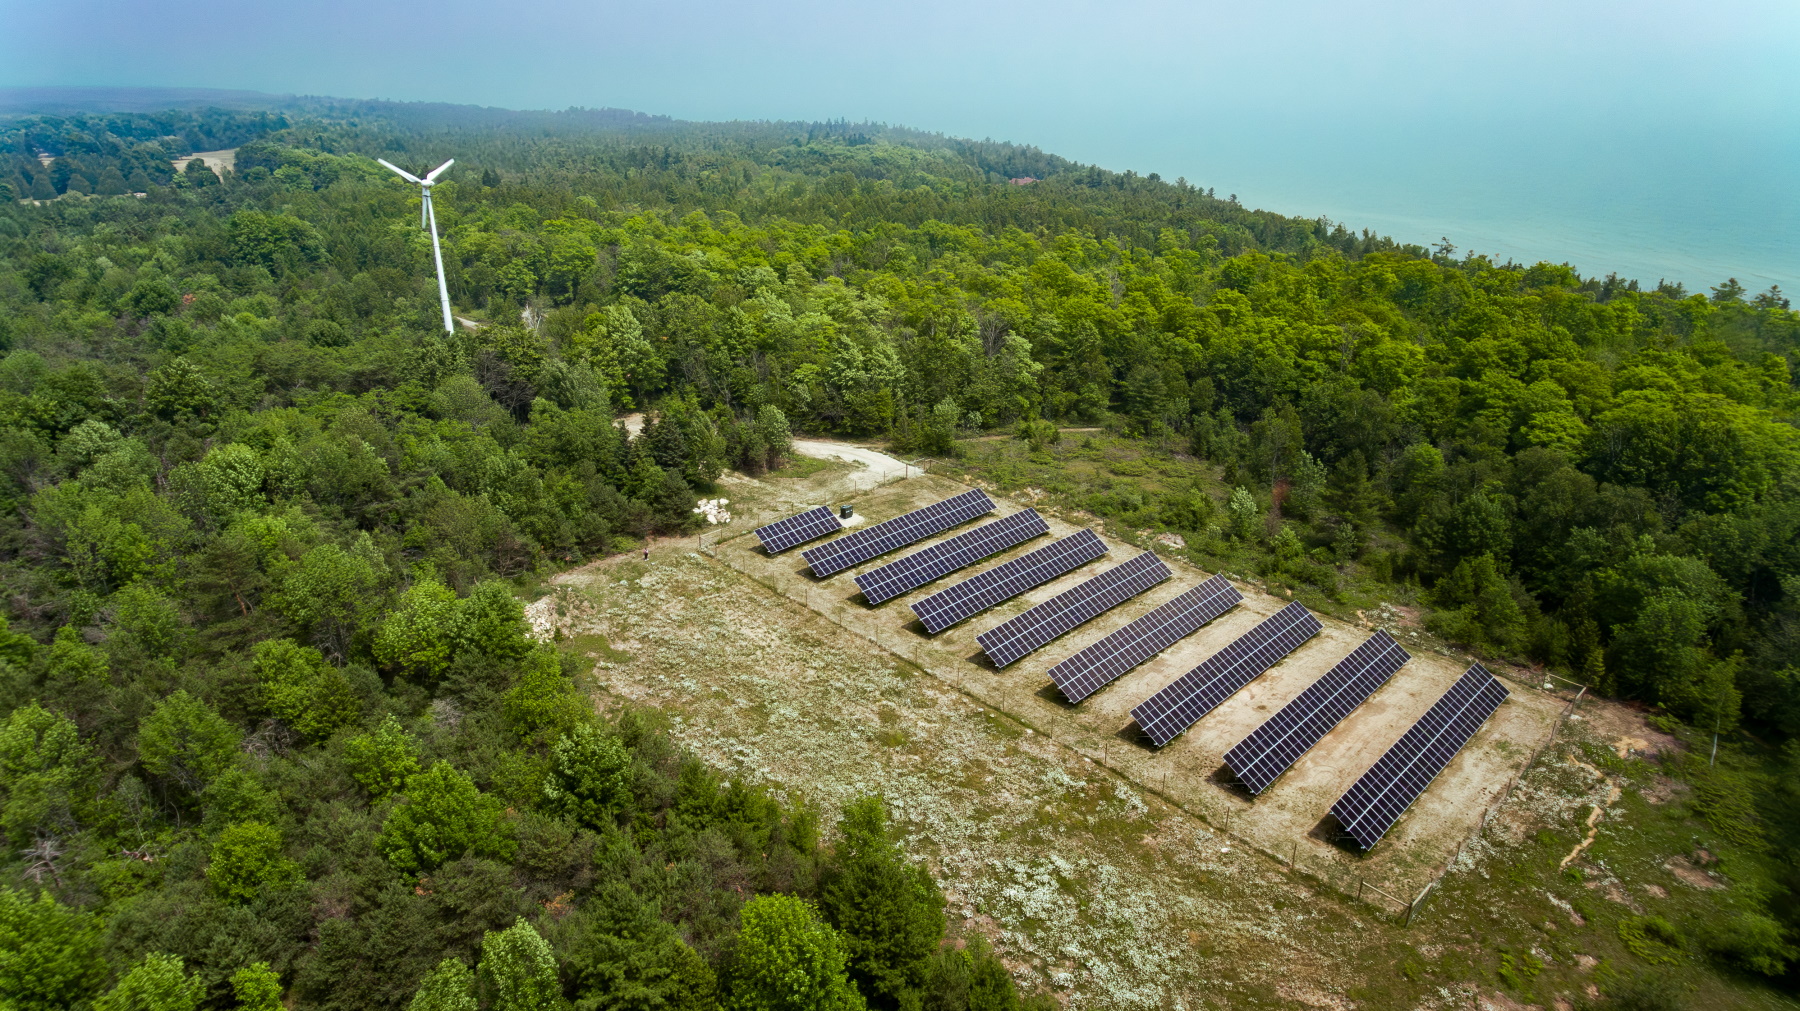 The solar array and wind turbine are seen from above.